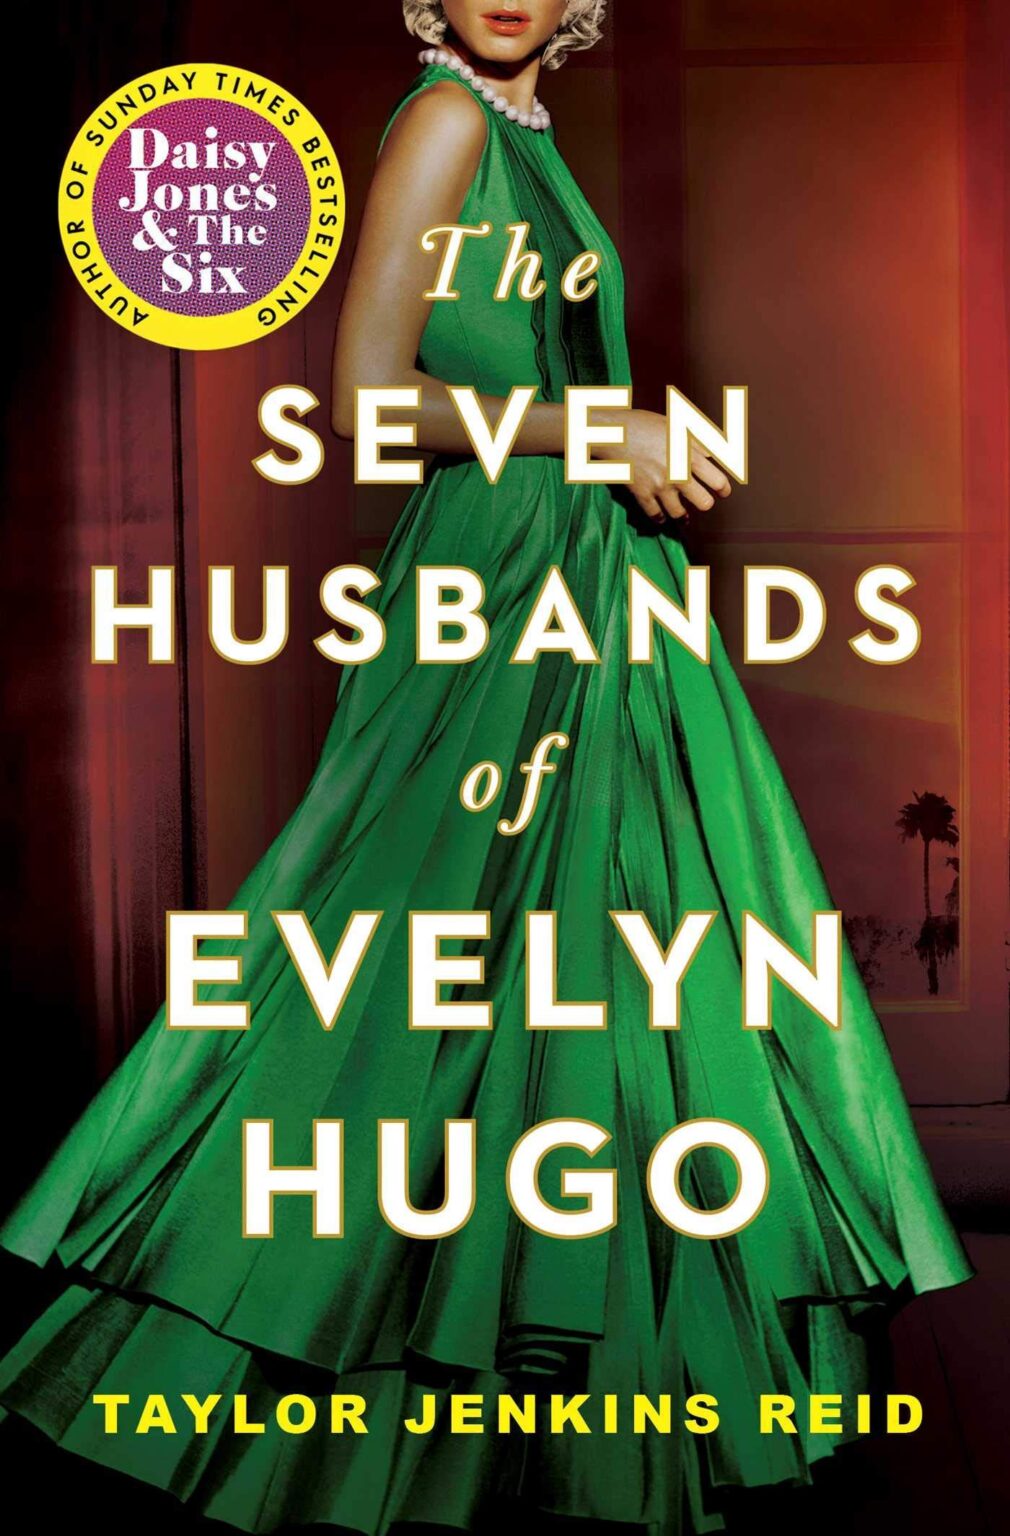 'The Seven Husbands of Evelyn Hugo' is a powerful story. Here's why you need to read this popular book now.